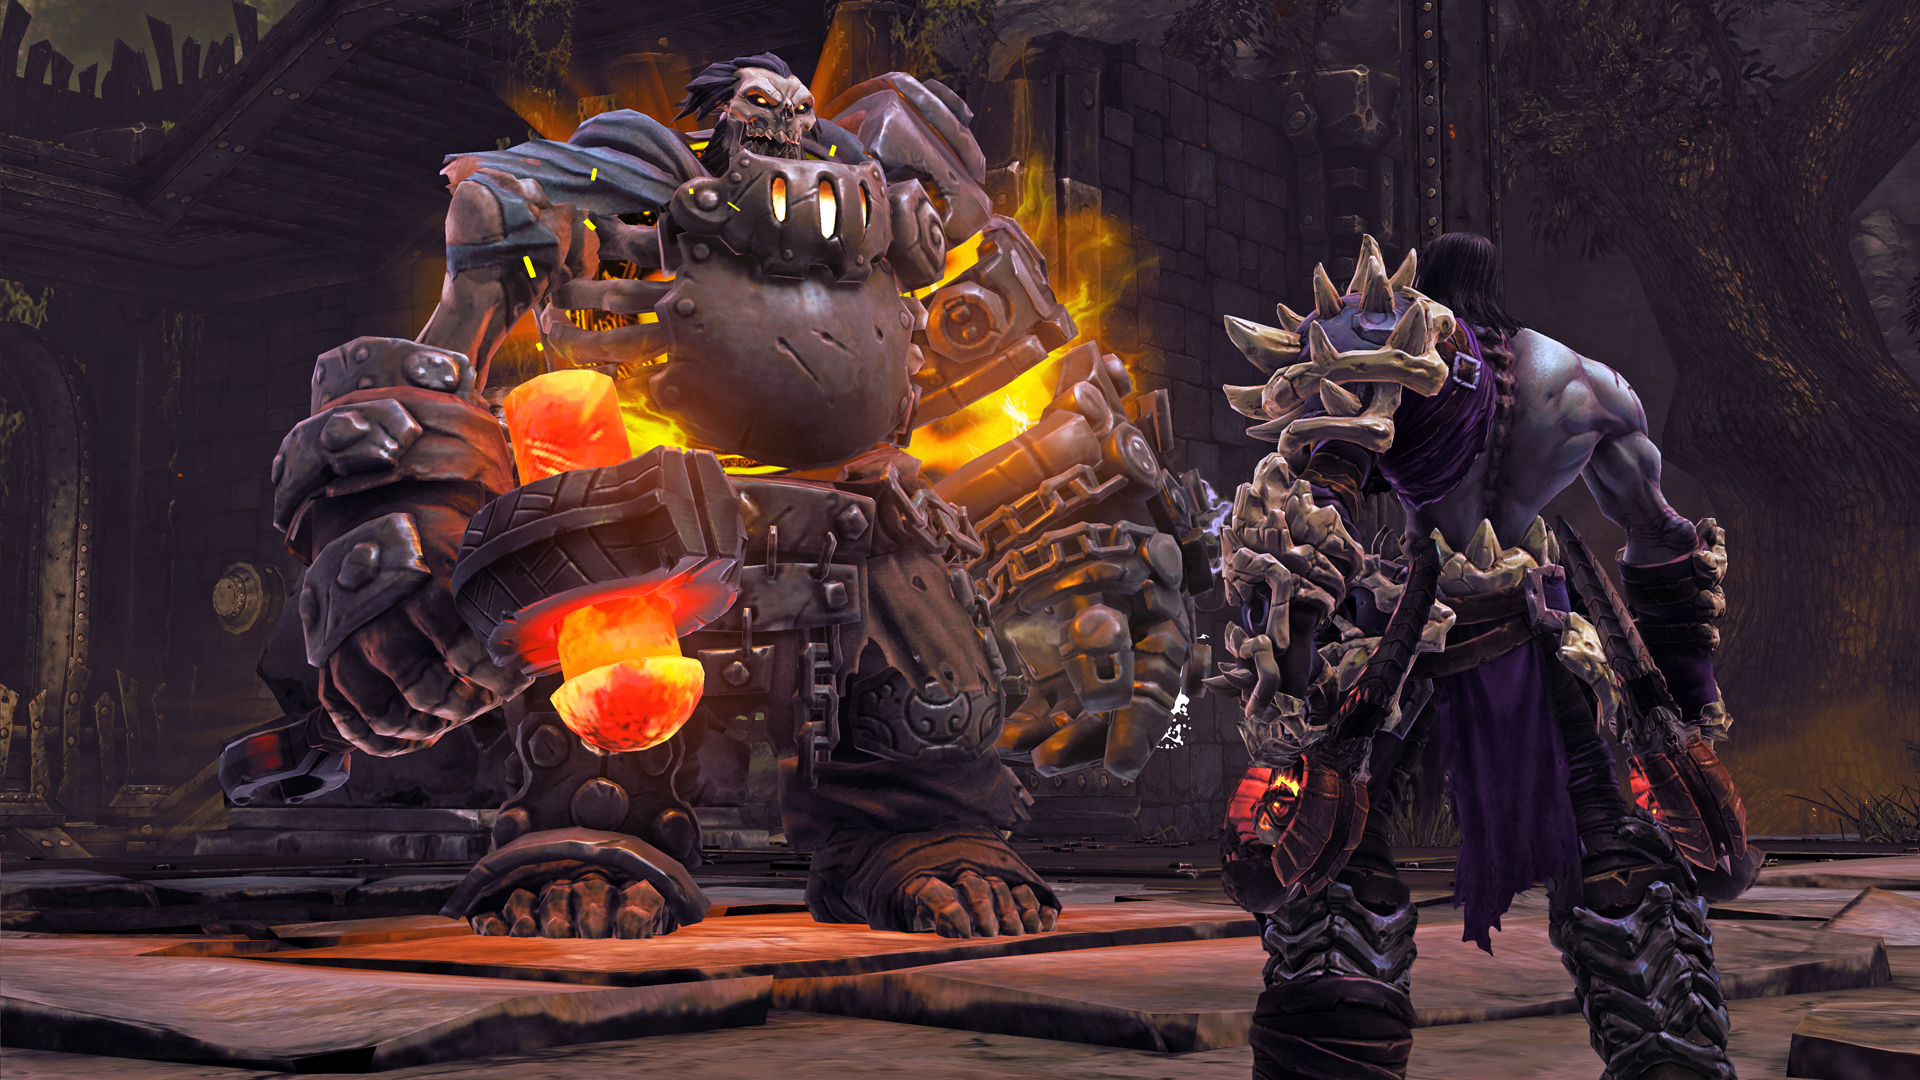 Darksiders 2 Abyssal Forge DLC Coming this Halloween - Just Push Start